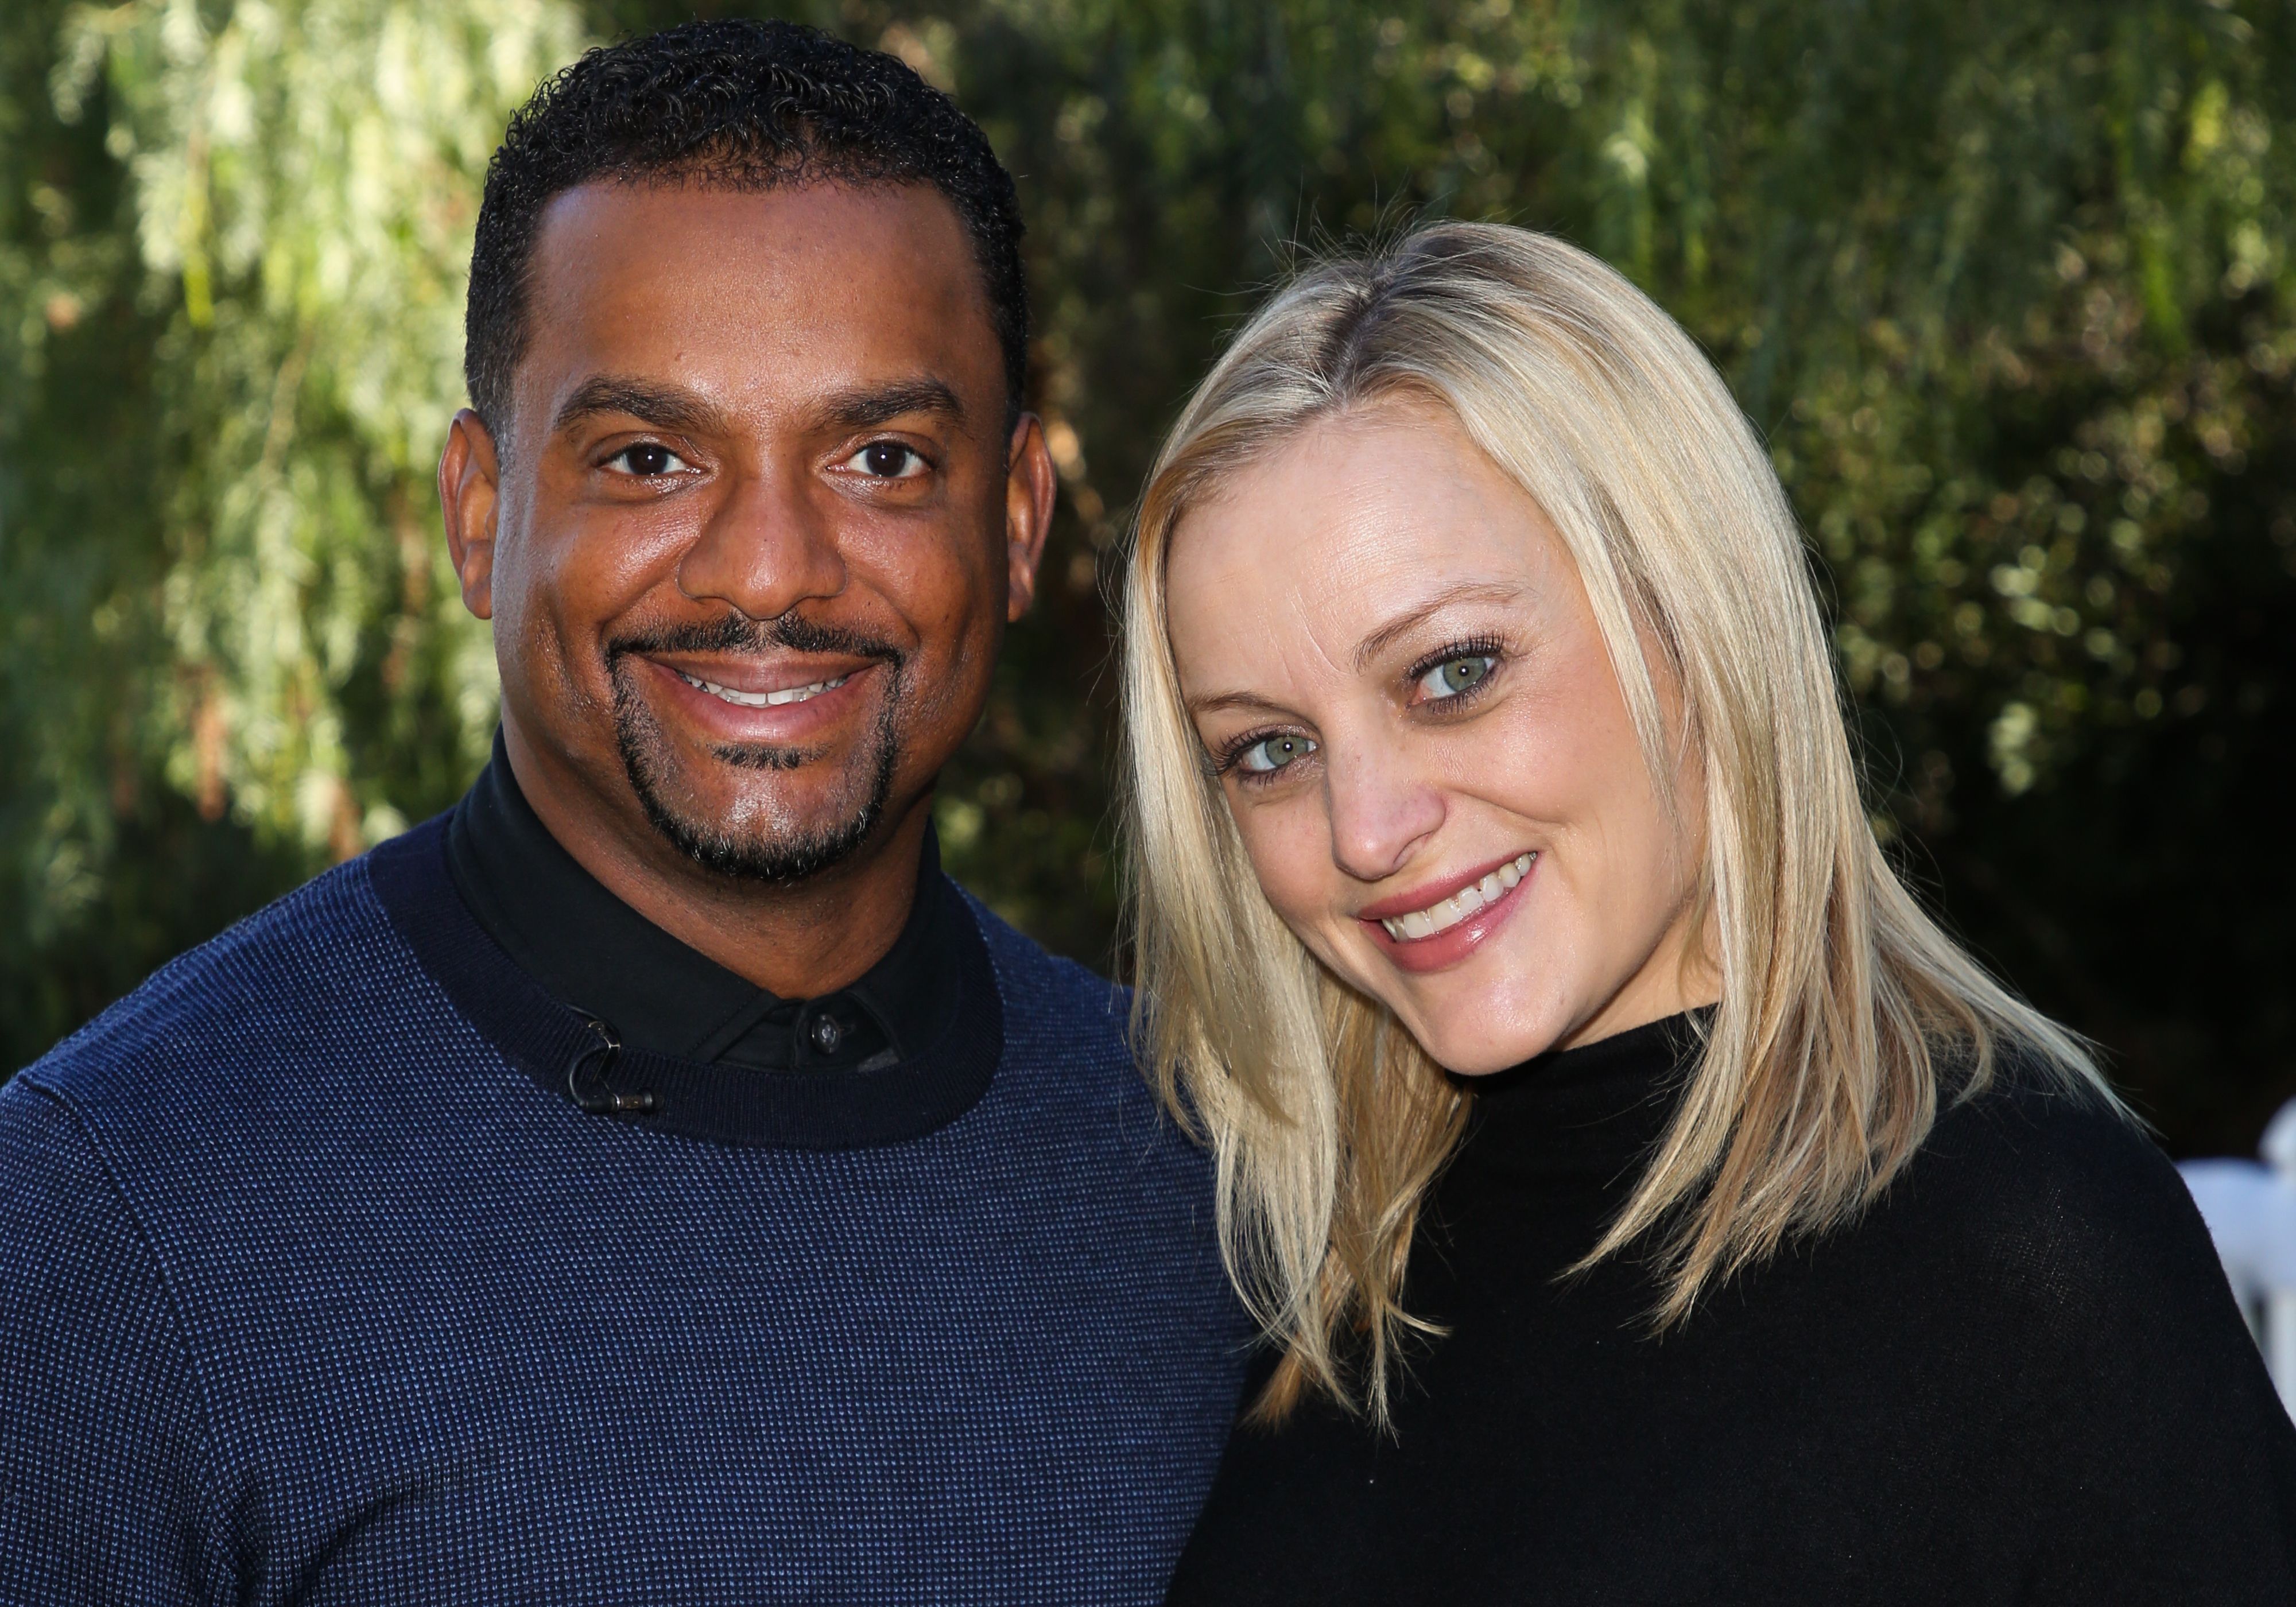 Angela Unkrich and Alfonso Ribeiro at Hallmark's "Home & Family" at Universal Studios Hollywood on December 15, 2018 in Universal City. | Photo: Getty Images